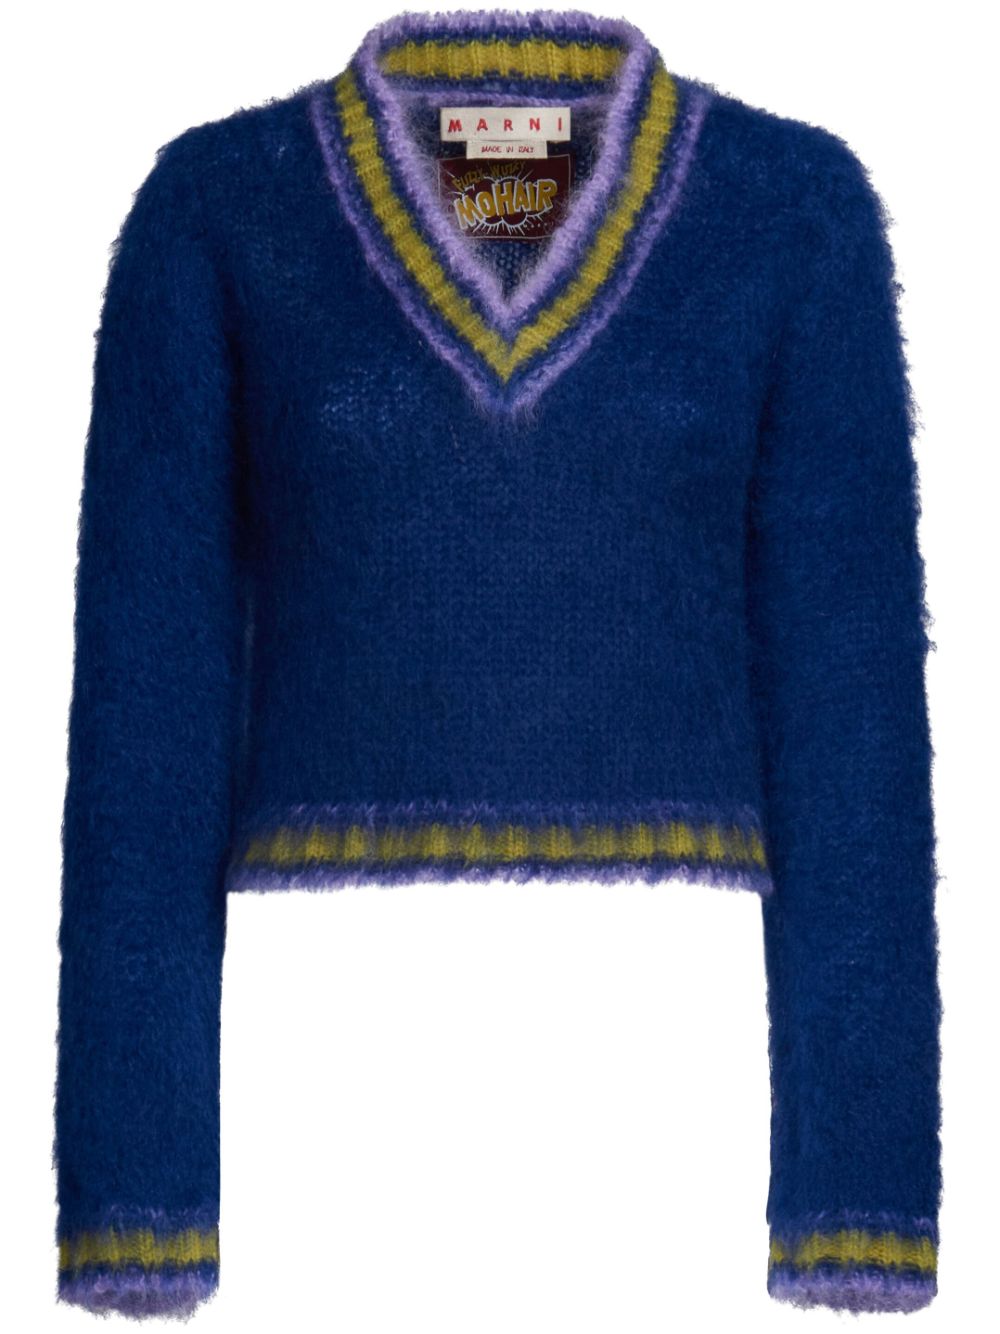 Bicolor Knitted Pullover for Women in Royal by MARNI